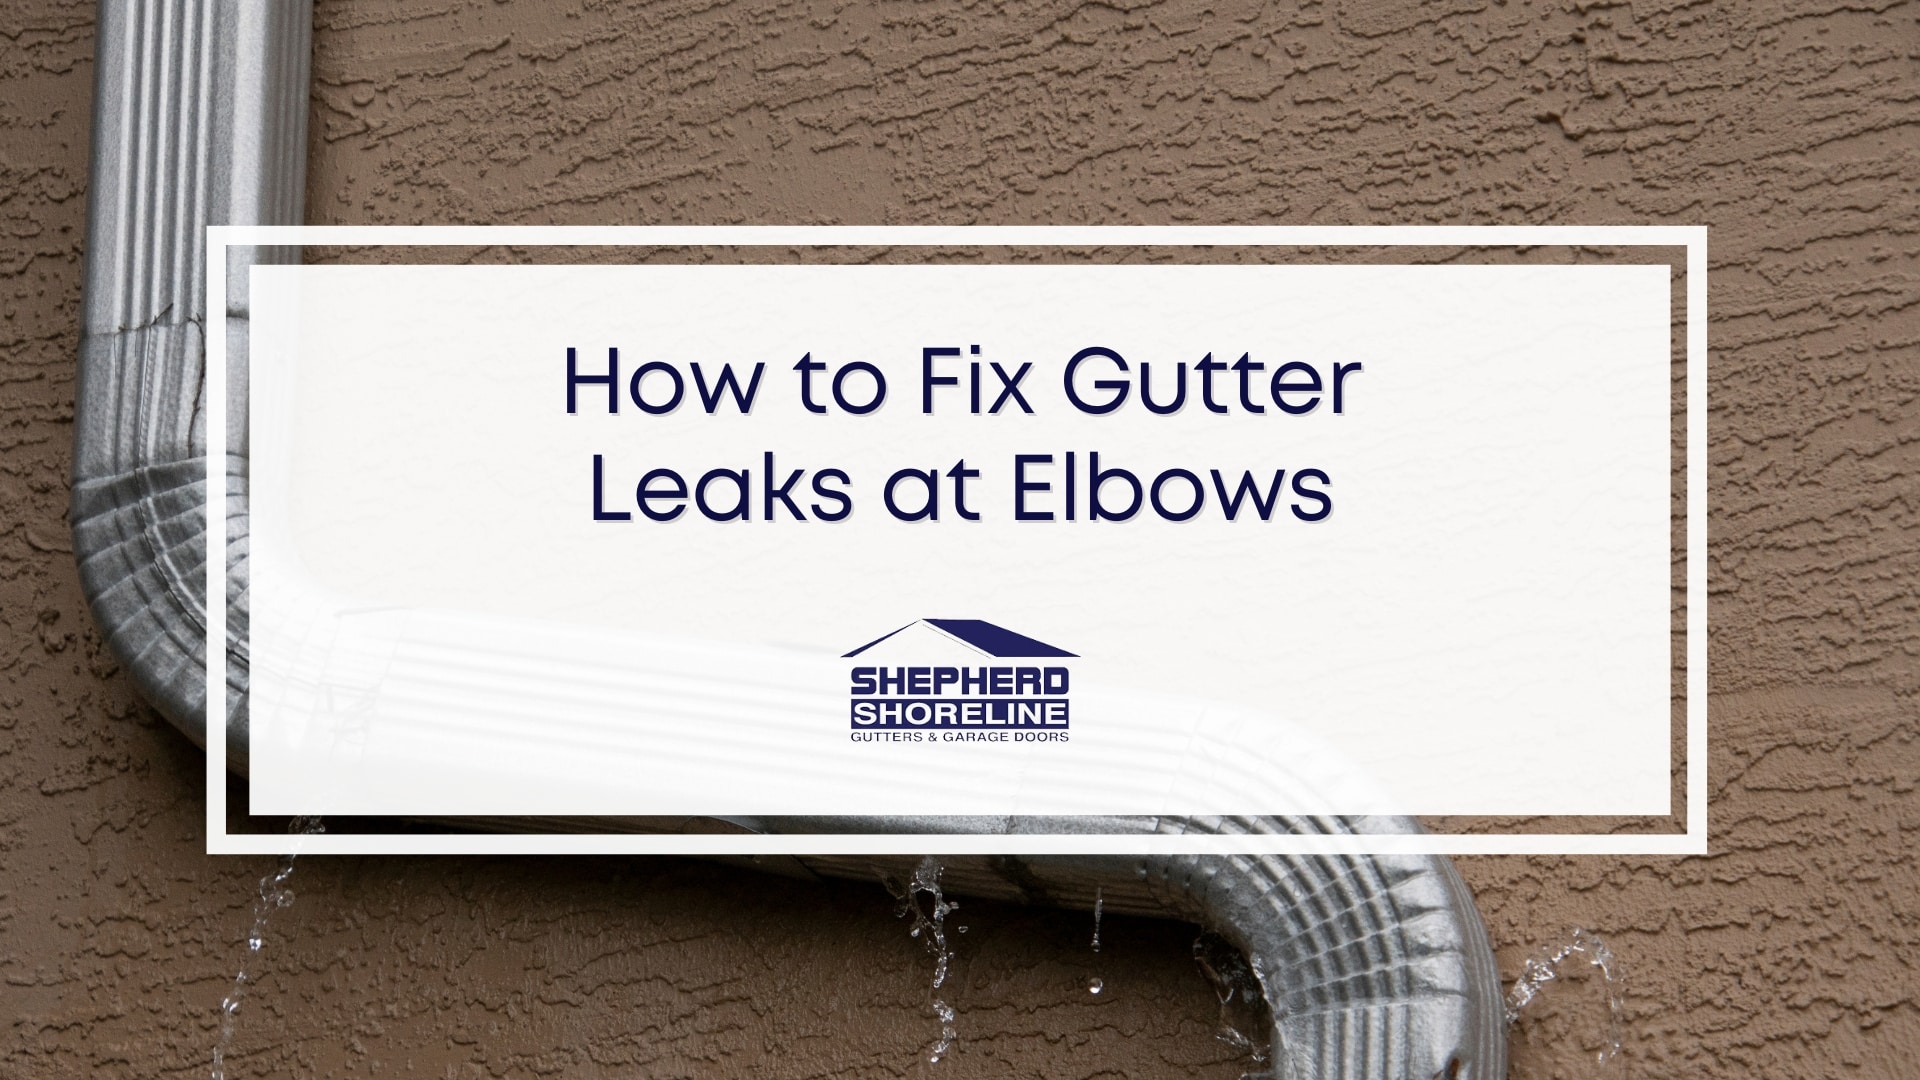 Featured image of how to fix gutter leaks at elbows